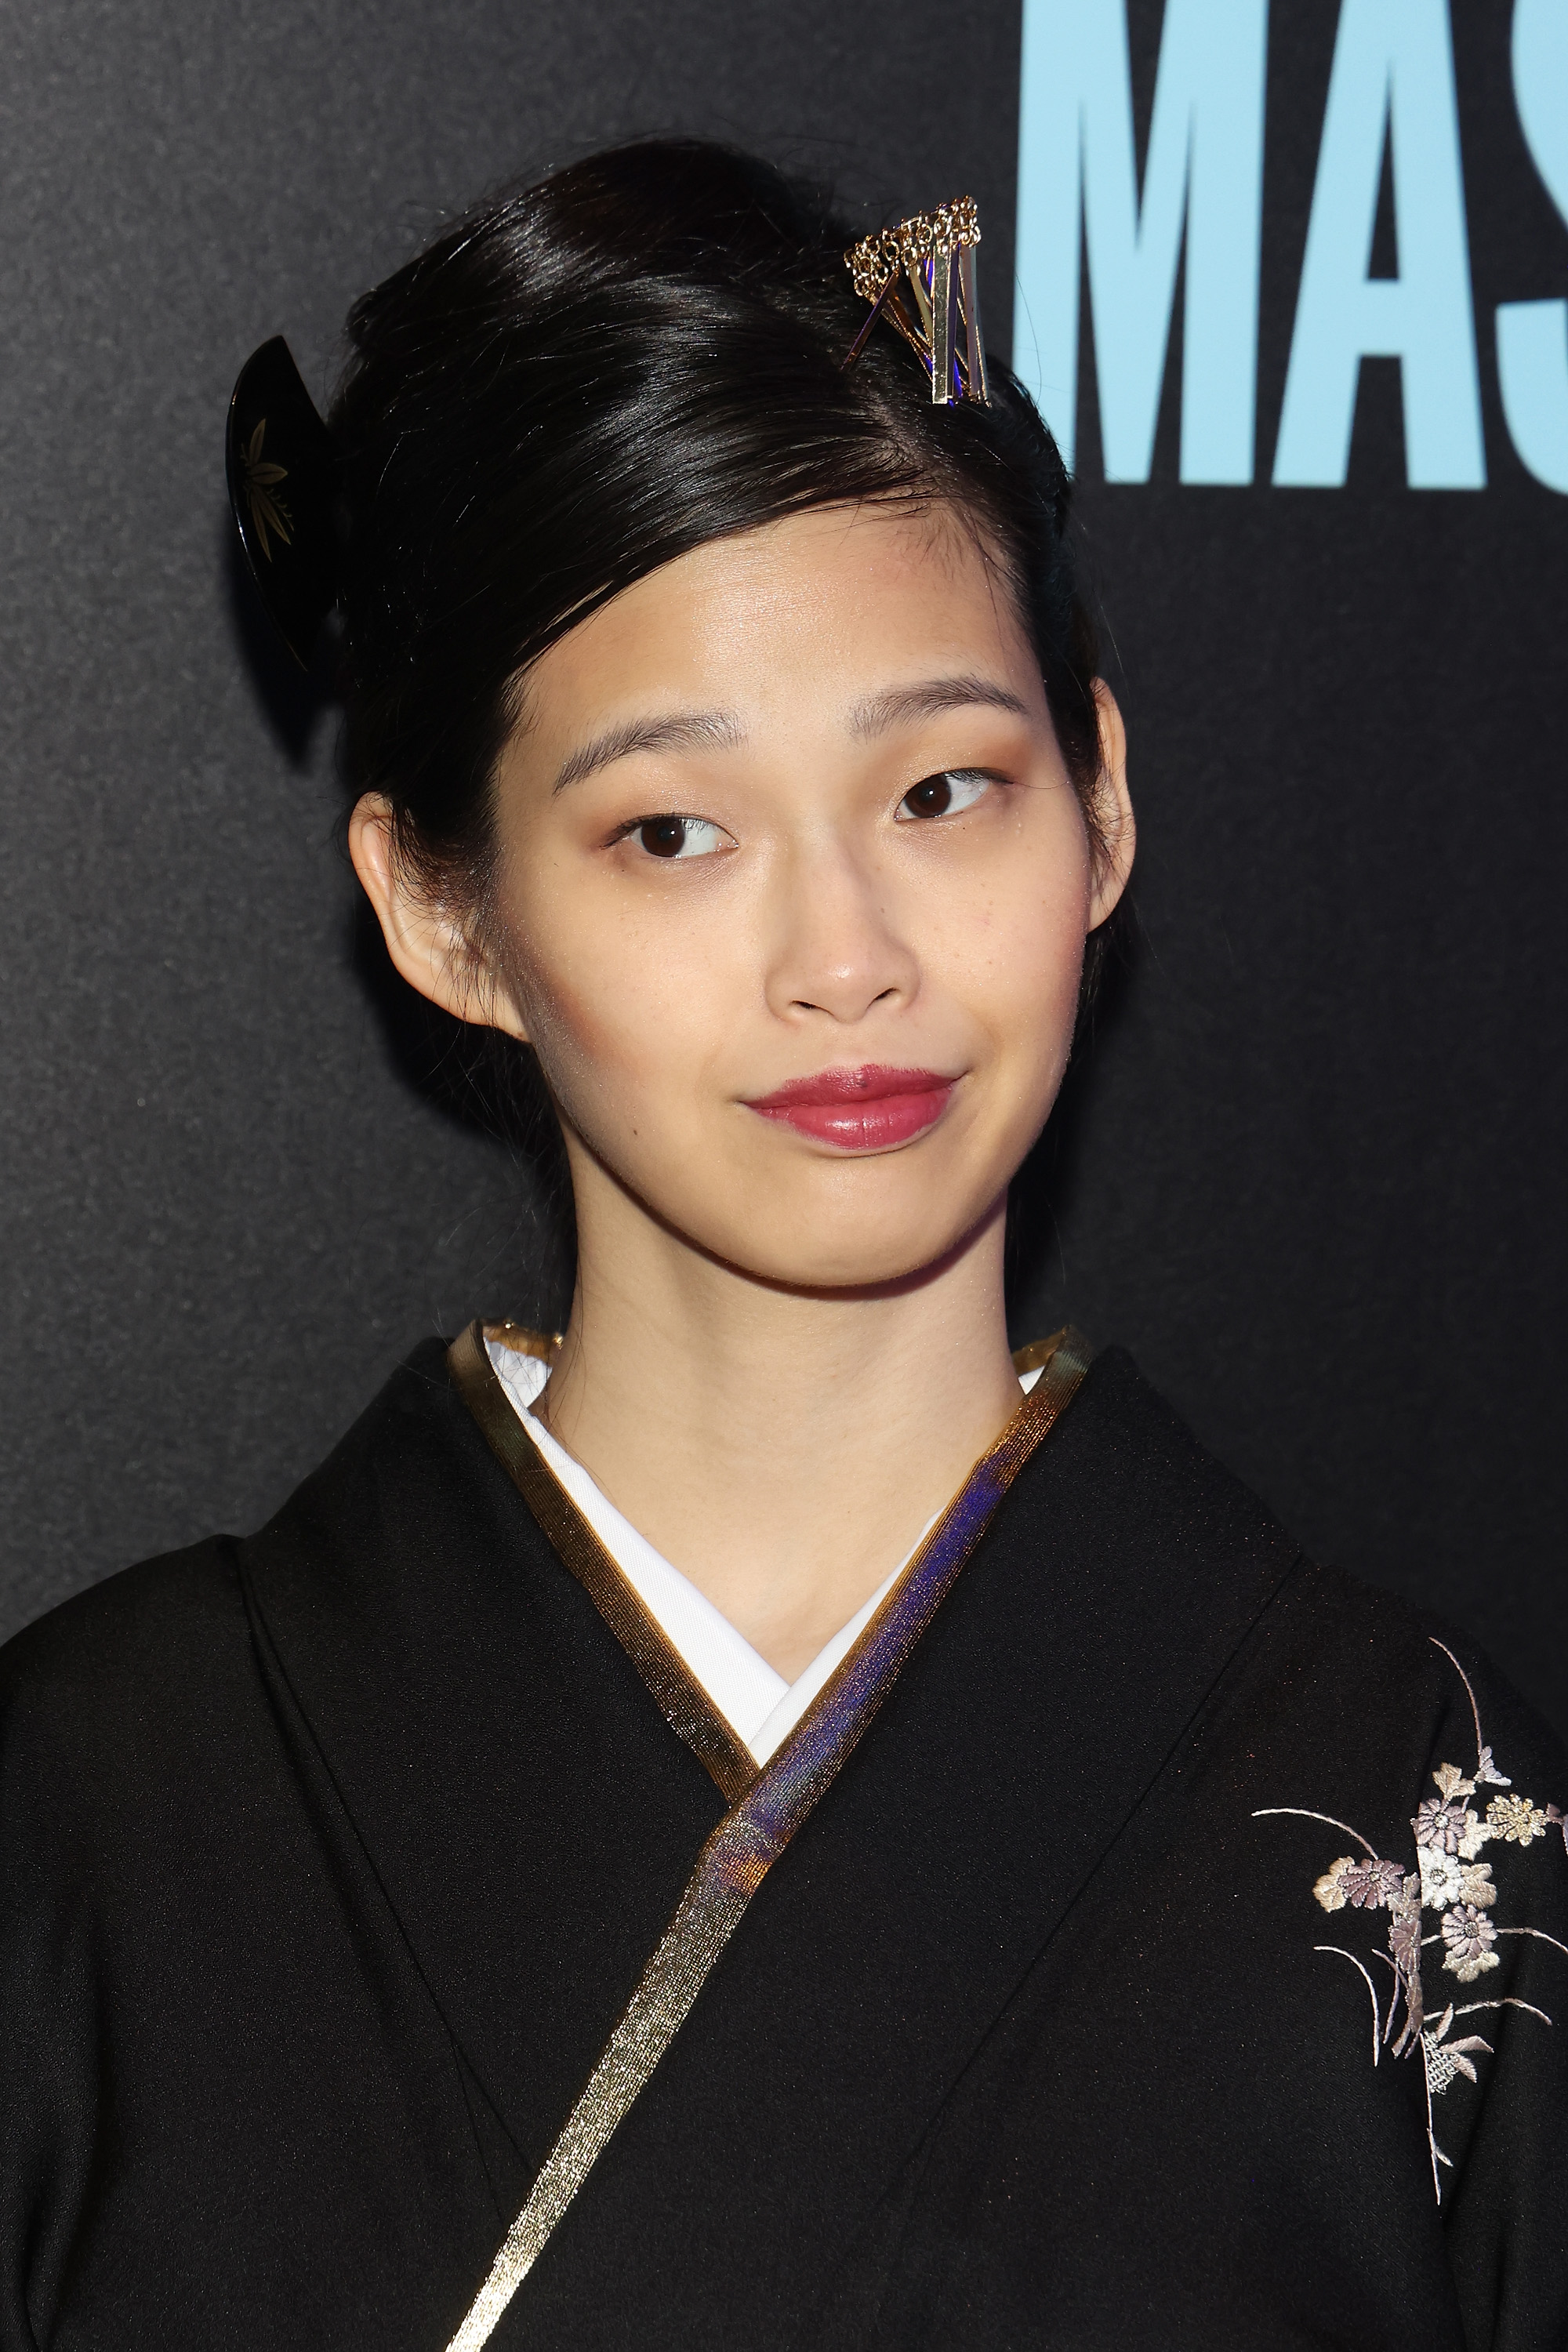 Riko Shibata in New York City on April 10, 2022 | Source: Getty Images